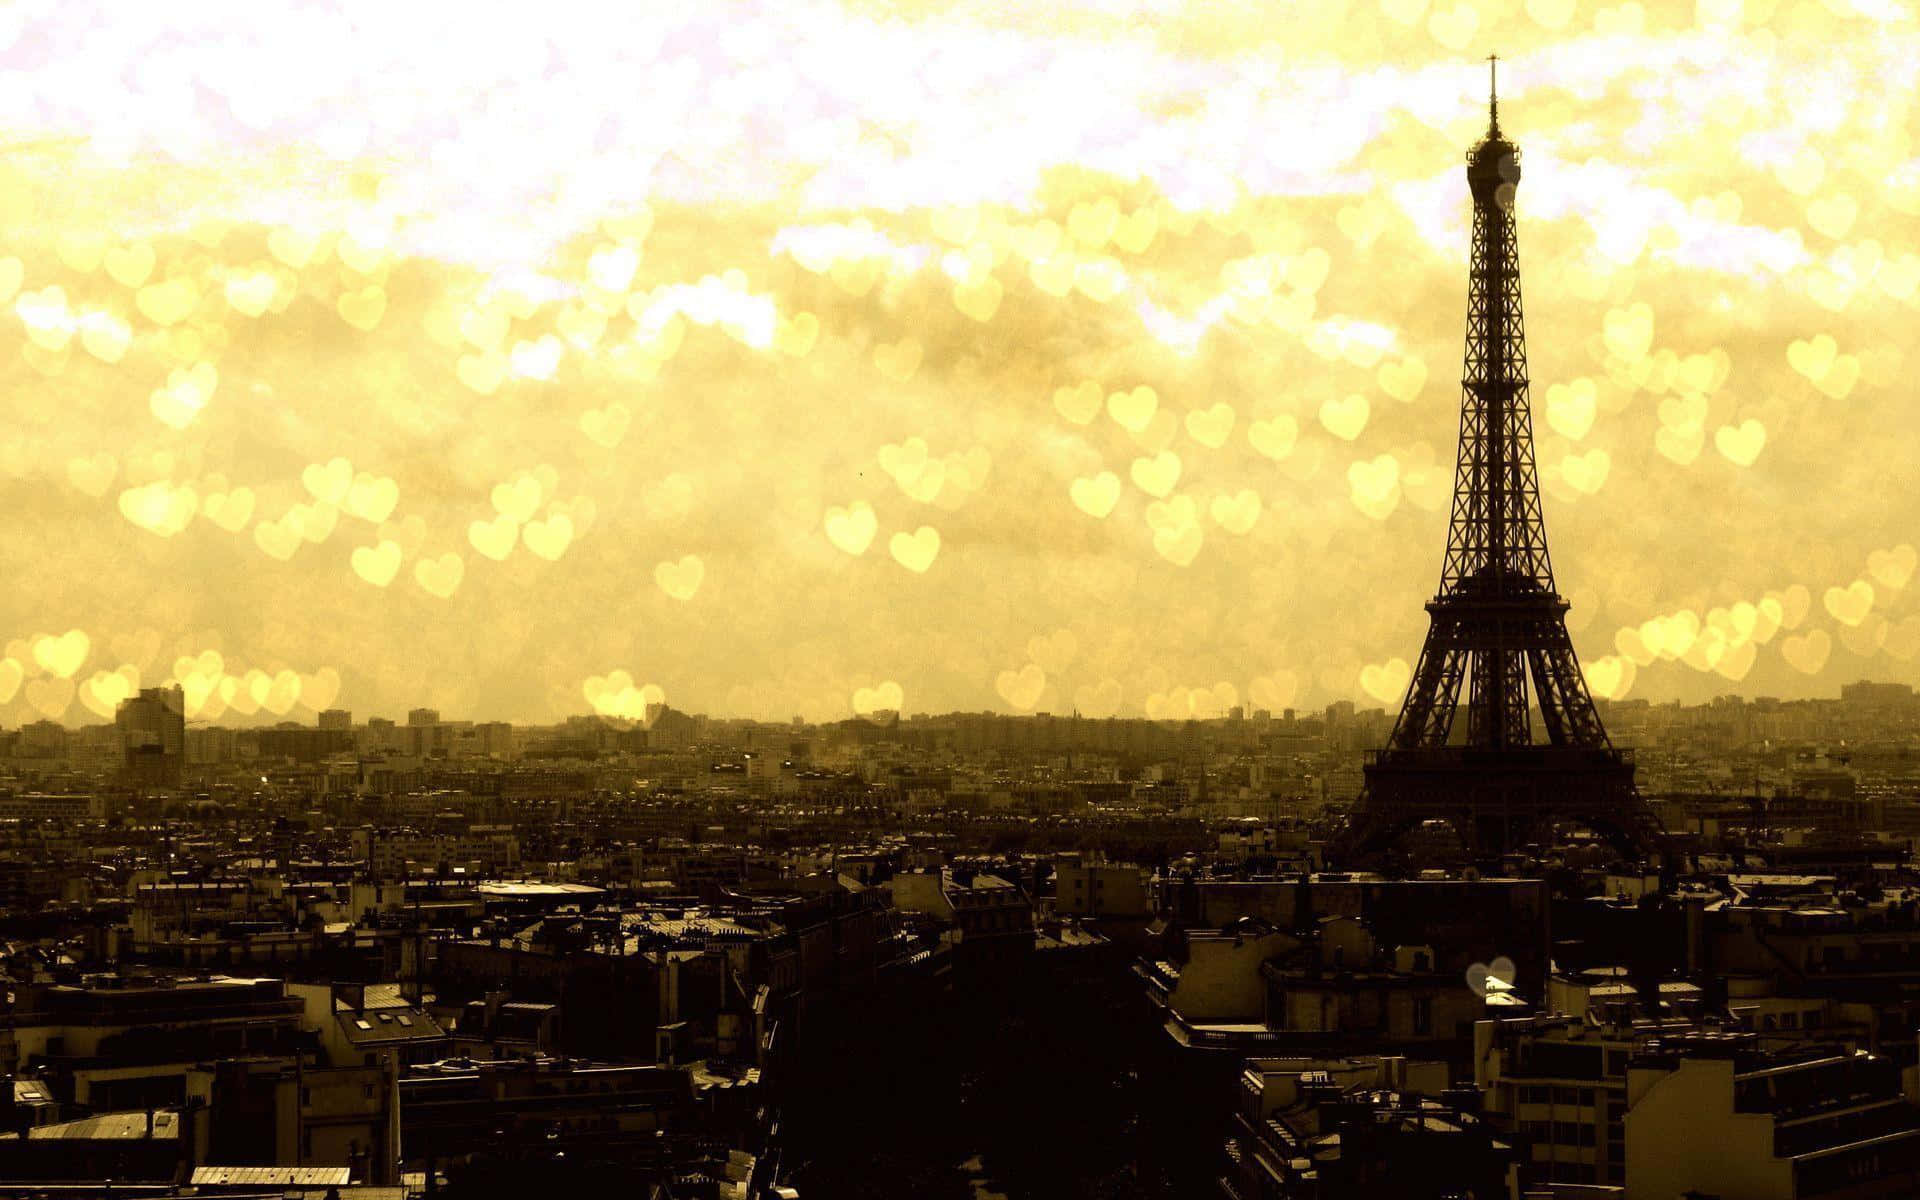 A breathtaking view of the majestic Eiffel Tower